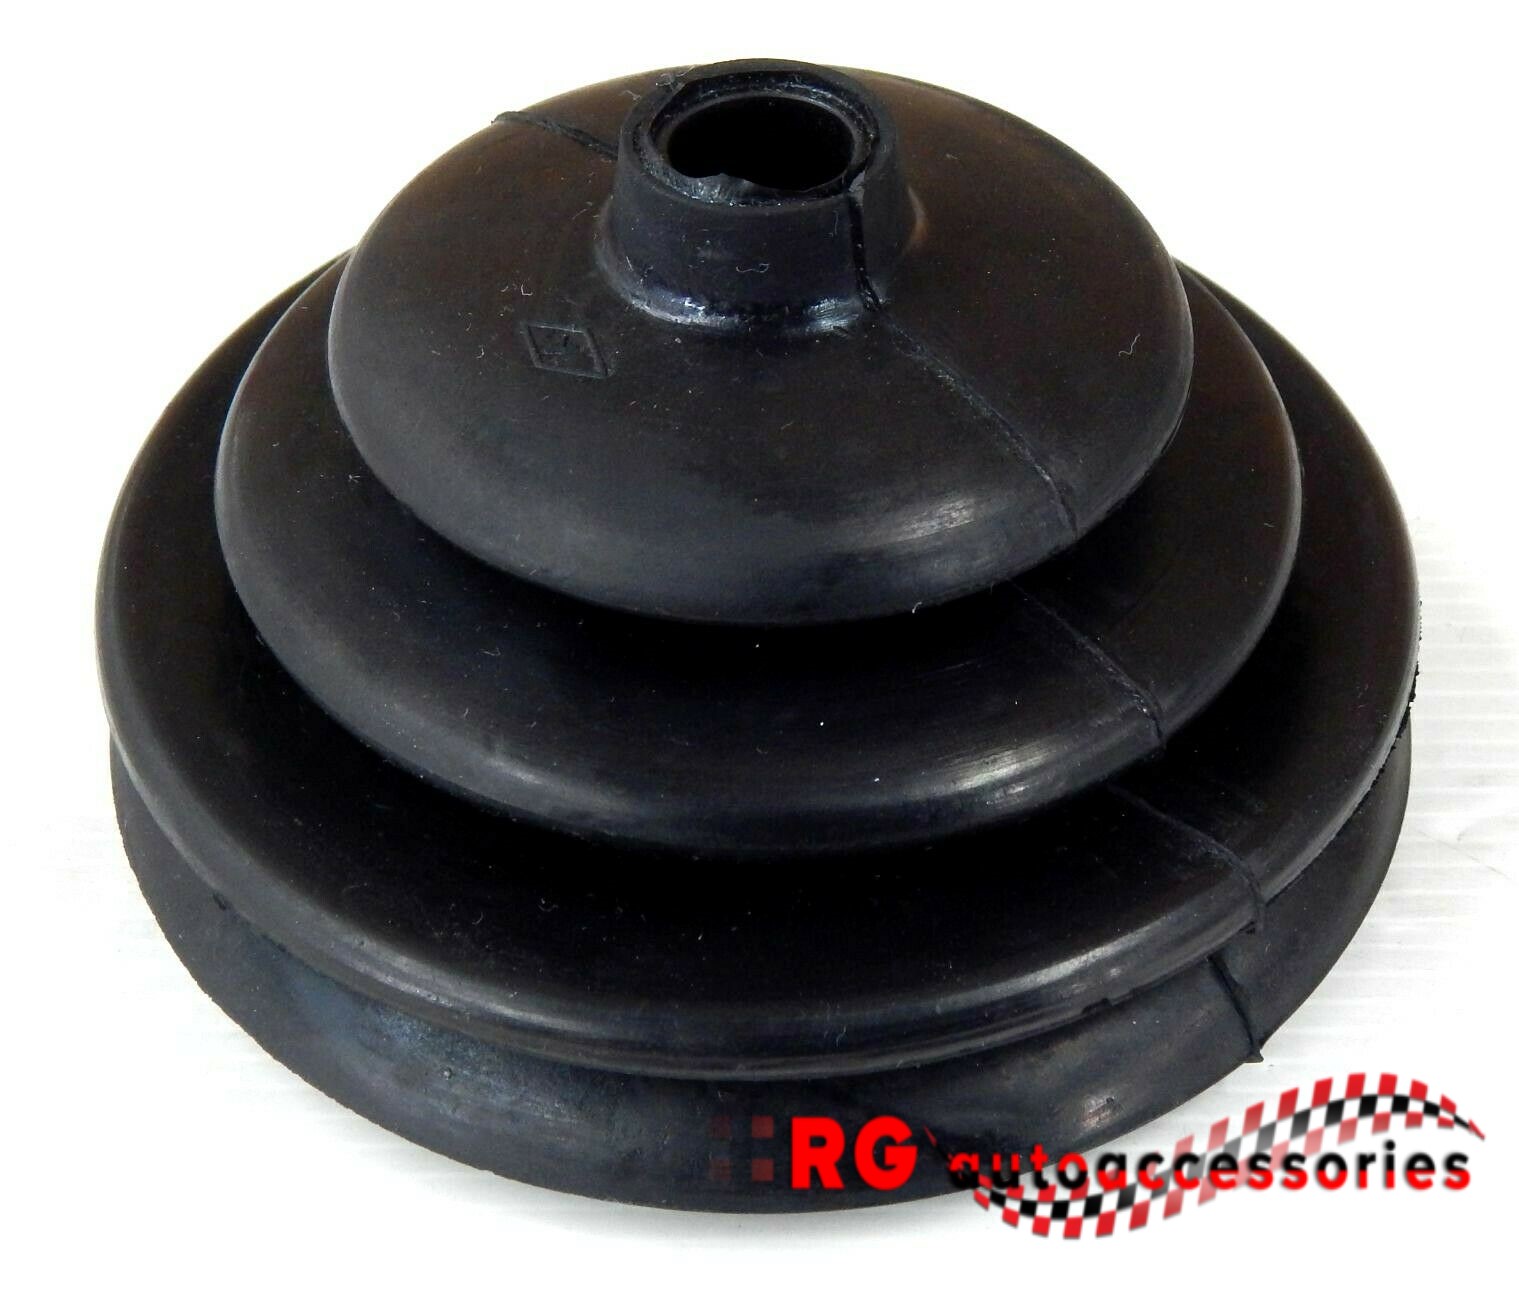 DATSUN NISSAN 120Y GEAR SHIFT LEVER RUBBER BOOT COVER WITH FREE FREIGHT